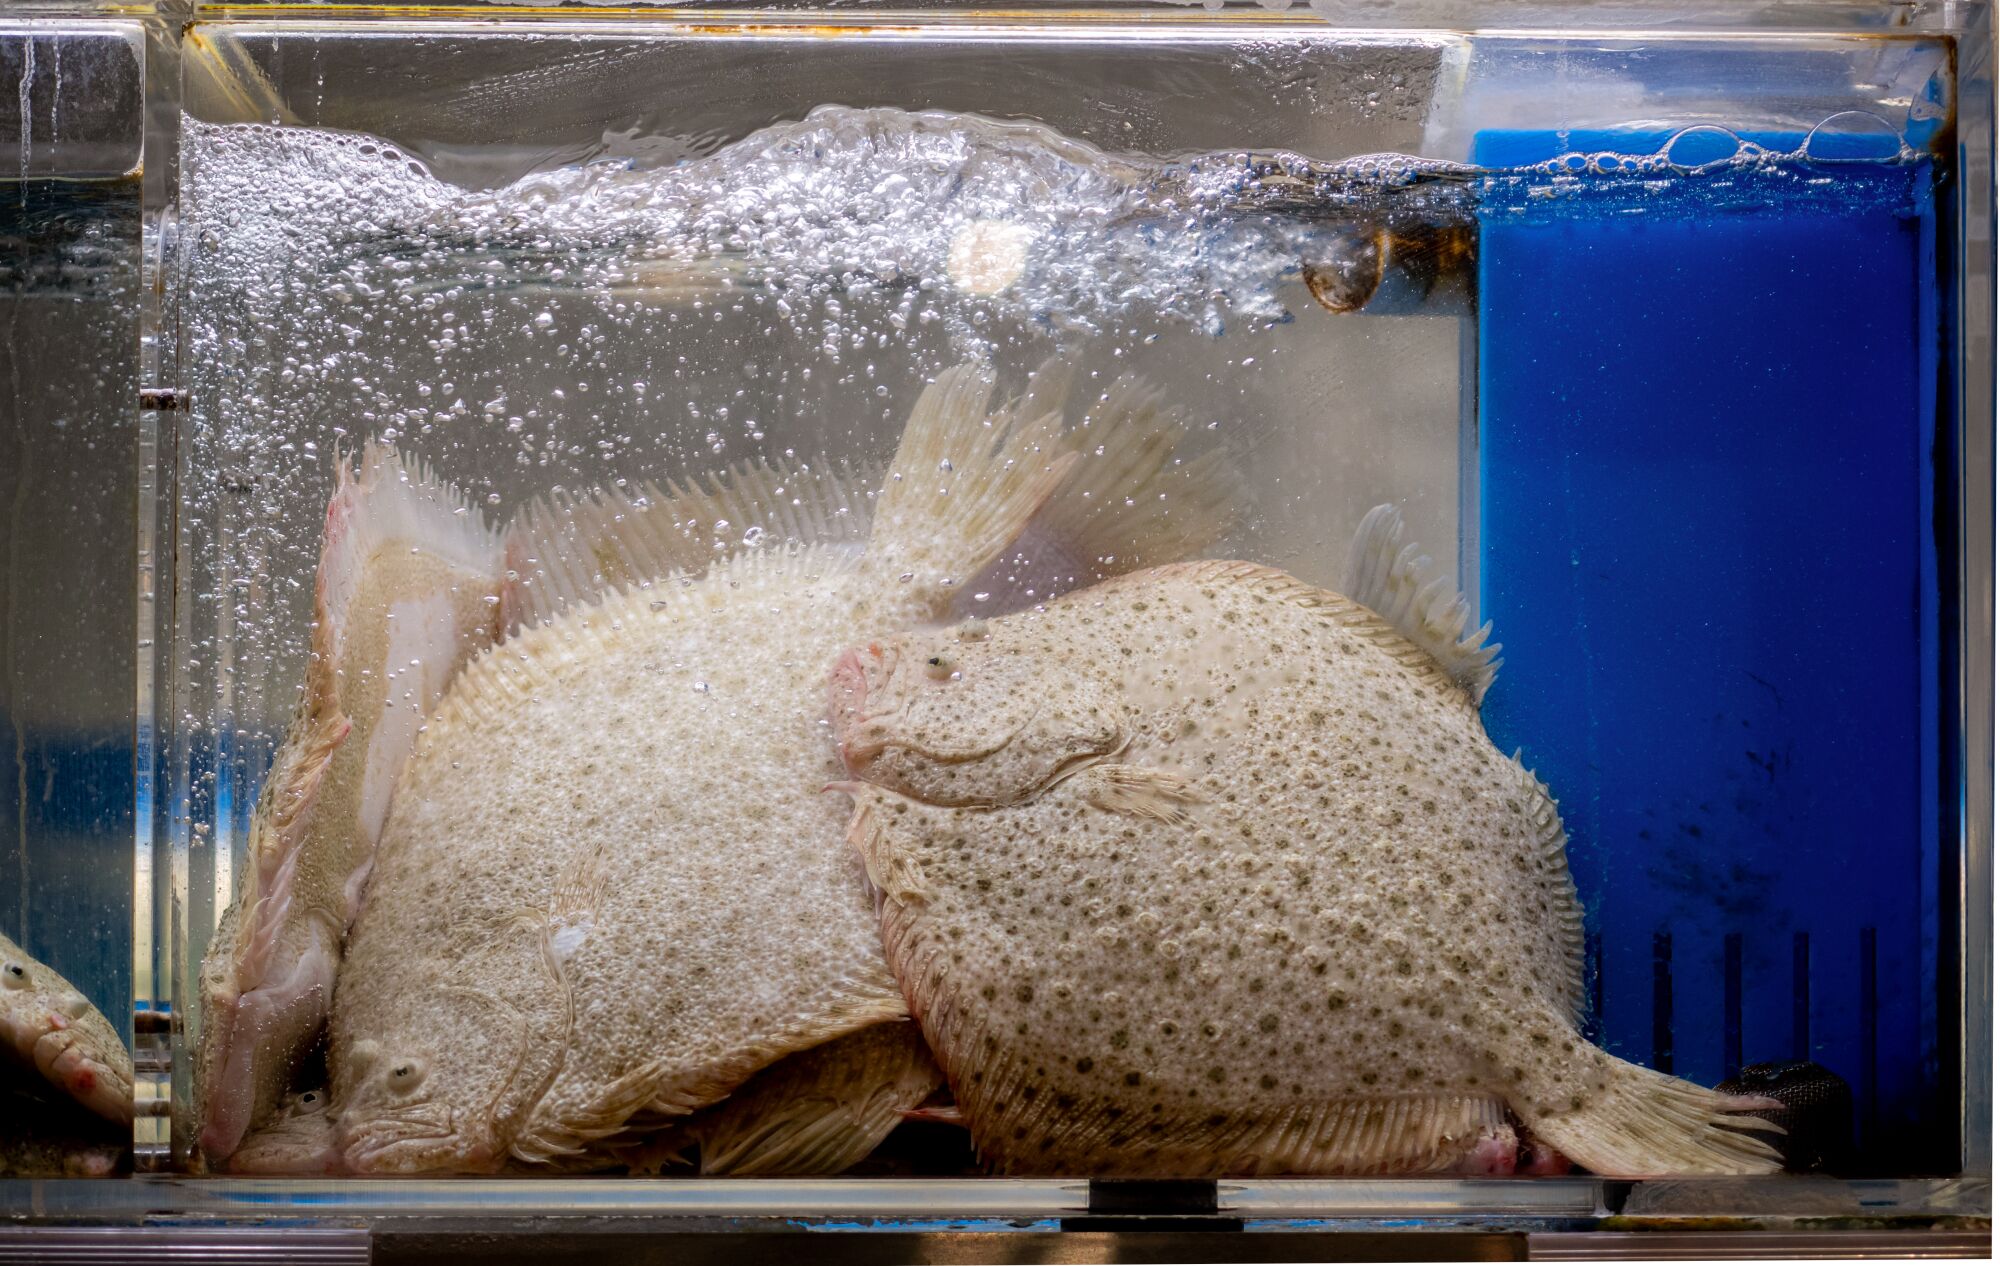 Live turbot swim in one of many fish tanks at the fish counter at a new 99 Ranch location.